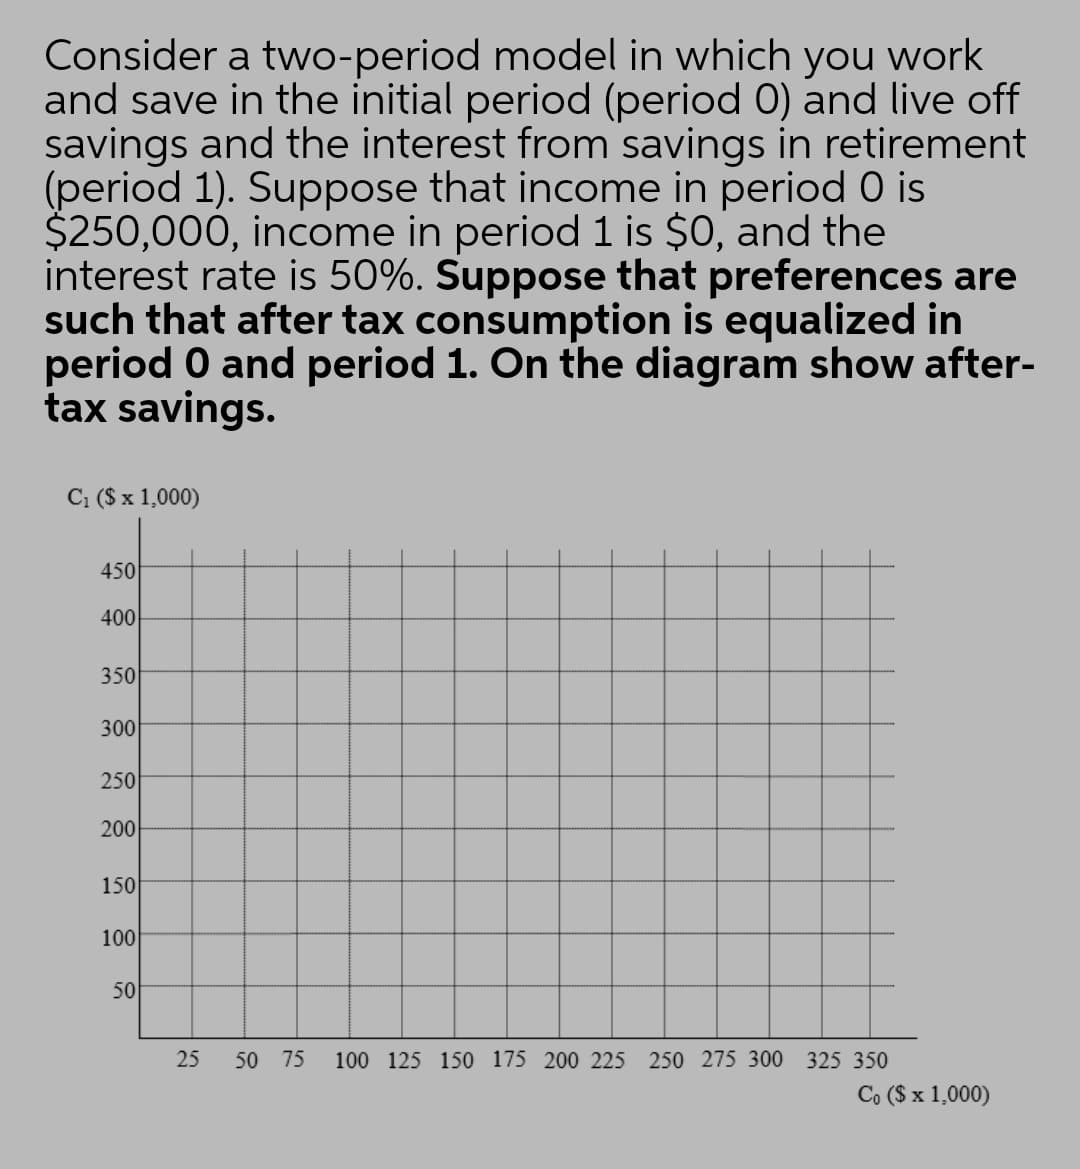 Consider a two-period model in which you work
and save in the initial period (period 0) and live off
savings and the interest from savings in retirement
(period 1). Suppose that income in period 0 is
$250,000, income in period 1 is $0, and the
interest rate is 50%. Suppose that preferences are
such that after tax consumption is equalized in
period O and period 1. On the diagram show after-
tax savings.
C; ($ x 1,000)
450
400
350
300
250
200
150
100
50
25
50 75
100 125 150 175 200 225 250 275 300 325 350
Co ($ x 1,000)
